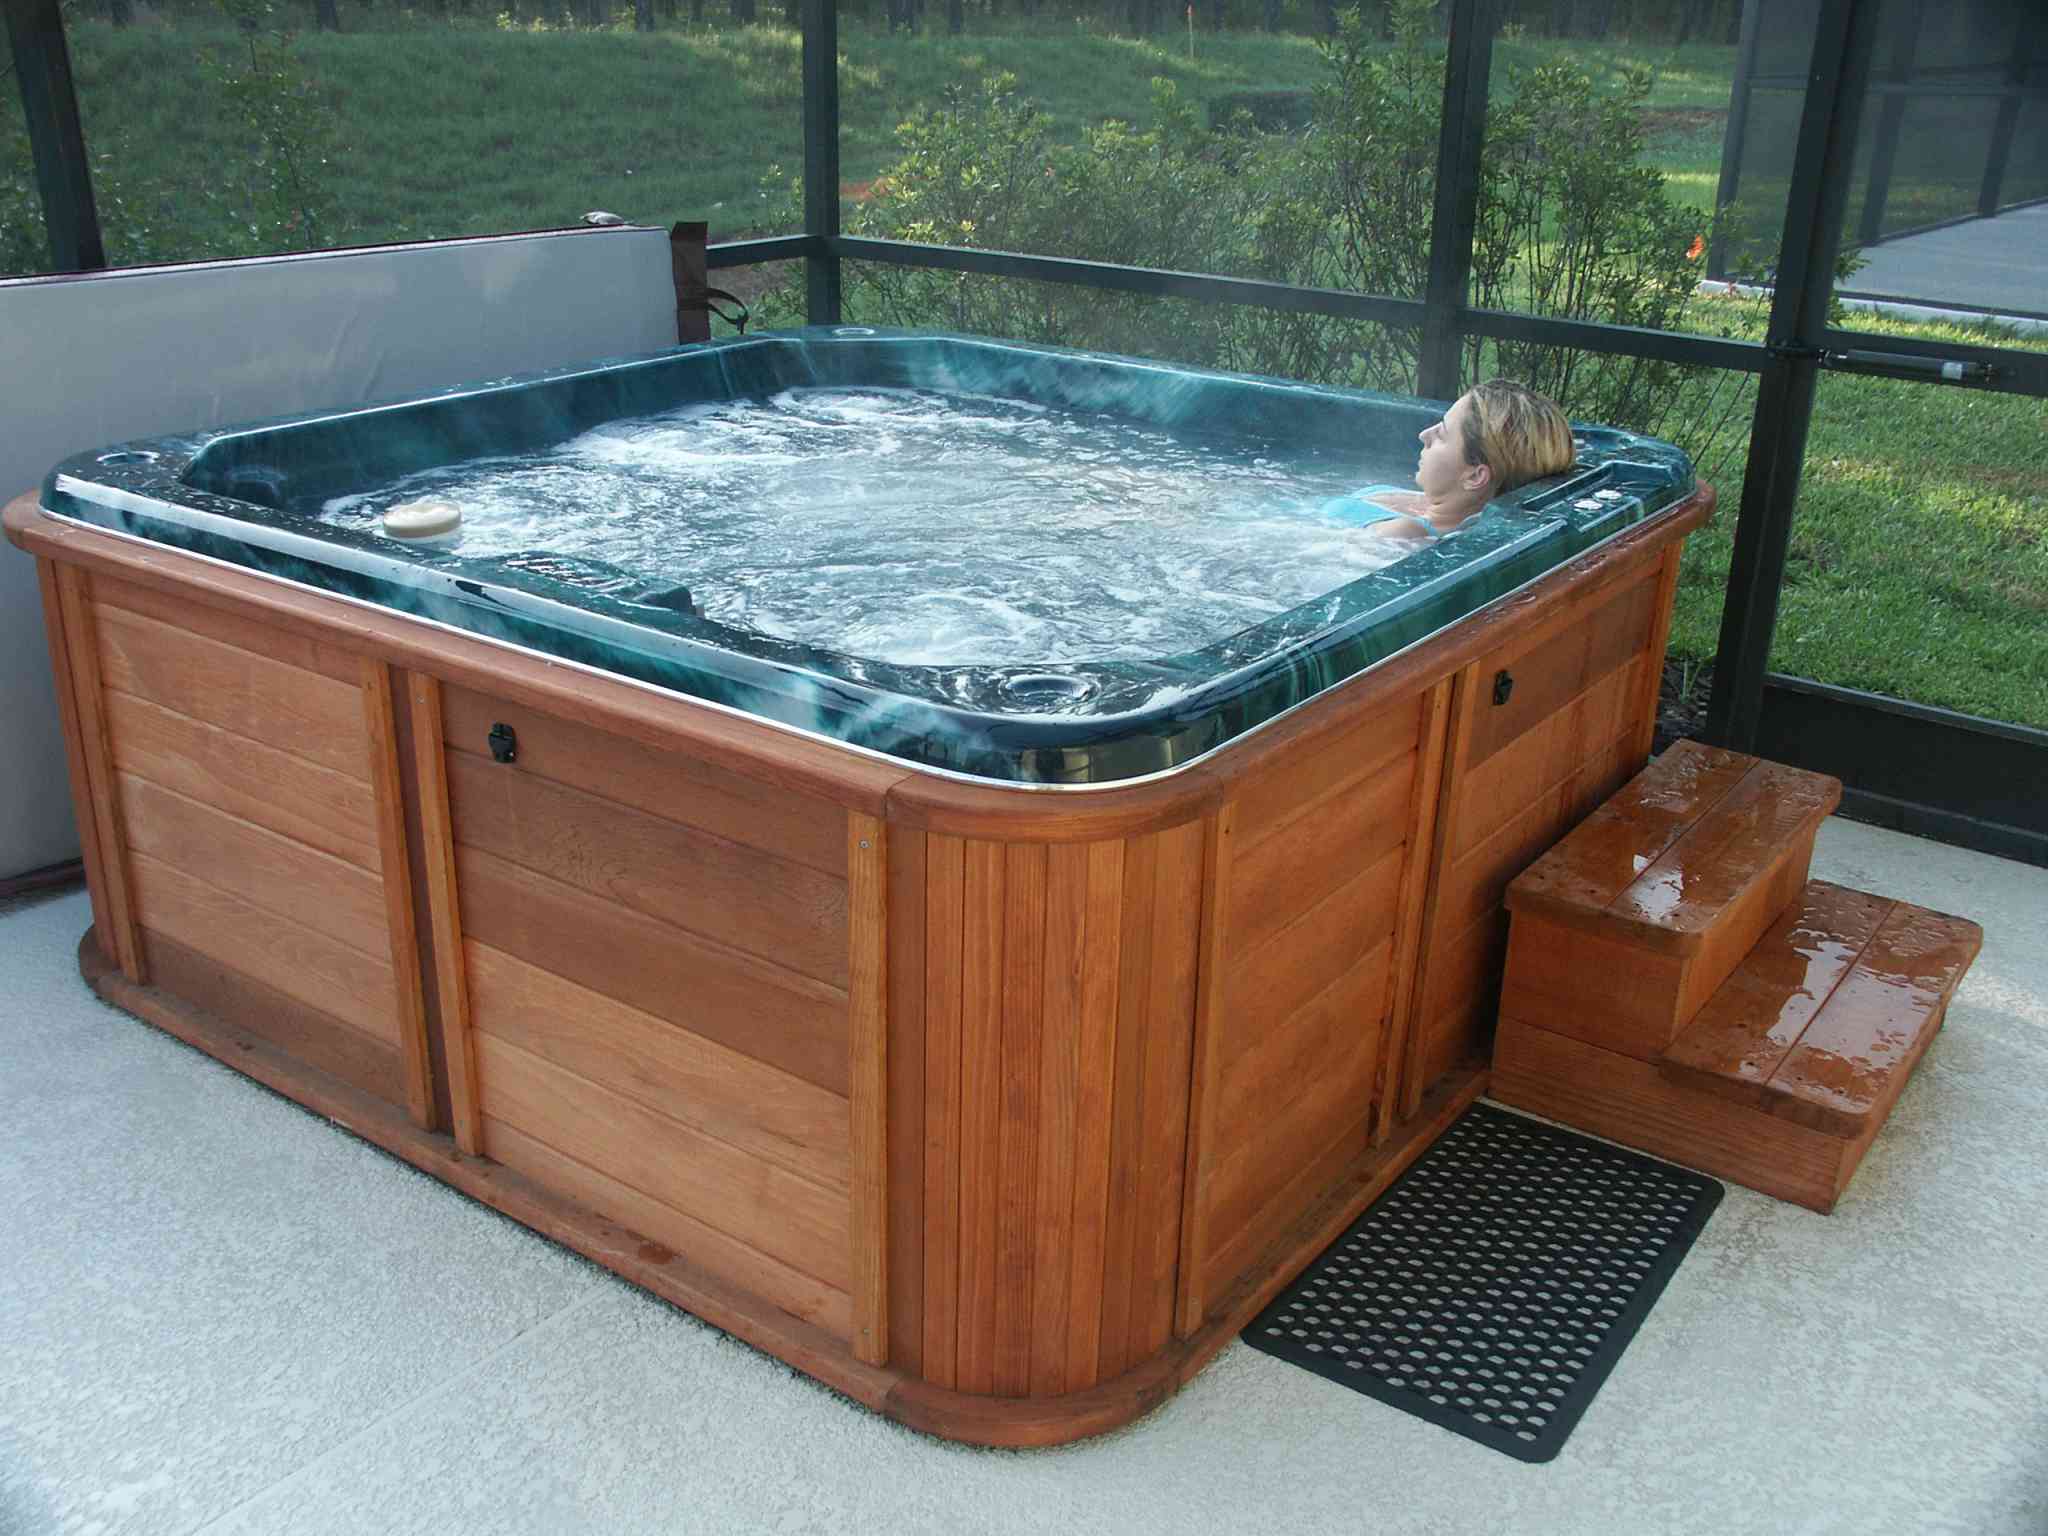 How Do I Care For My Hot Tub During The Winter Season? 